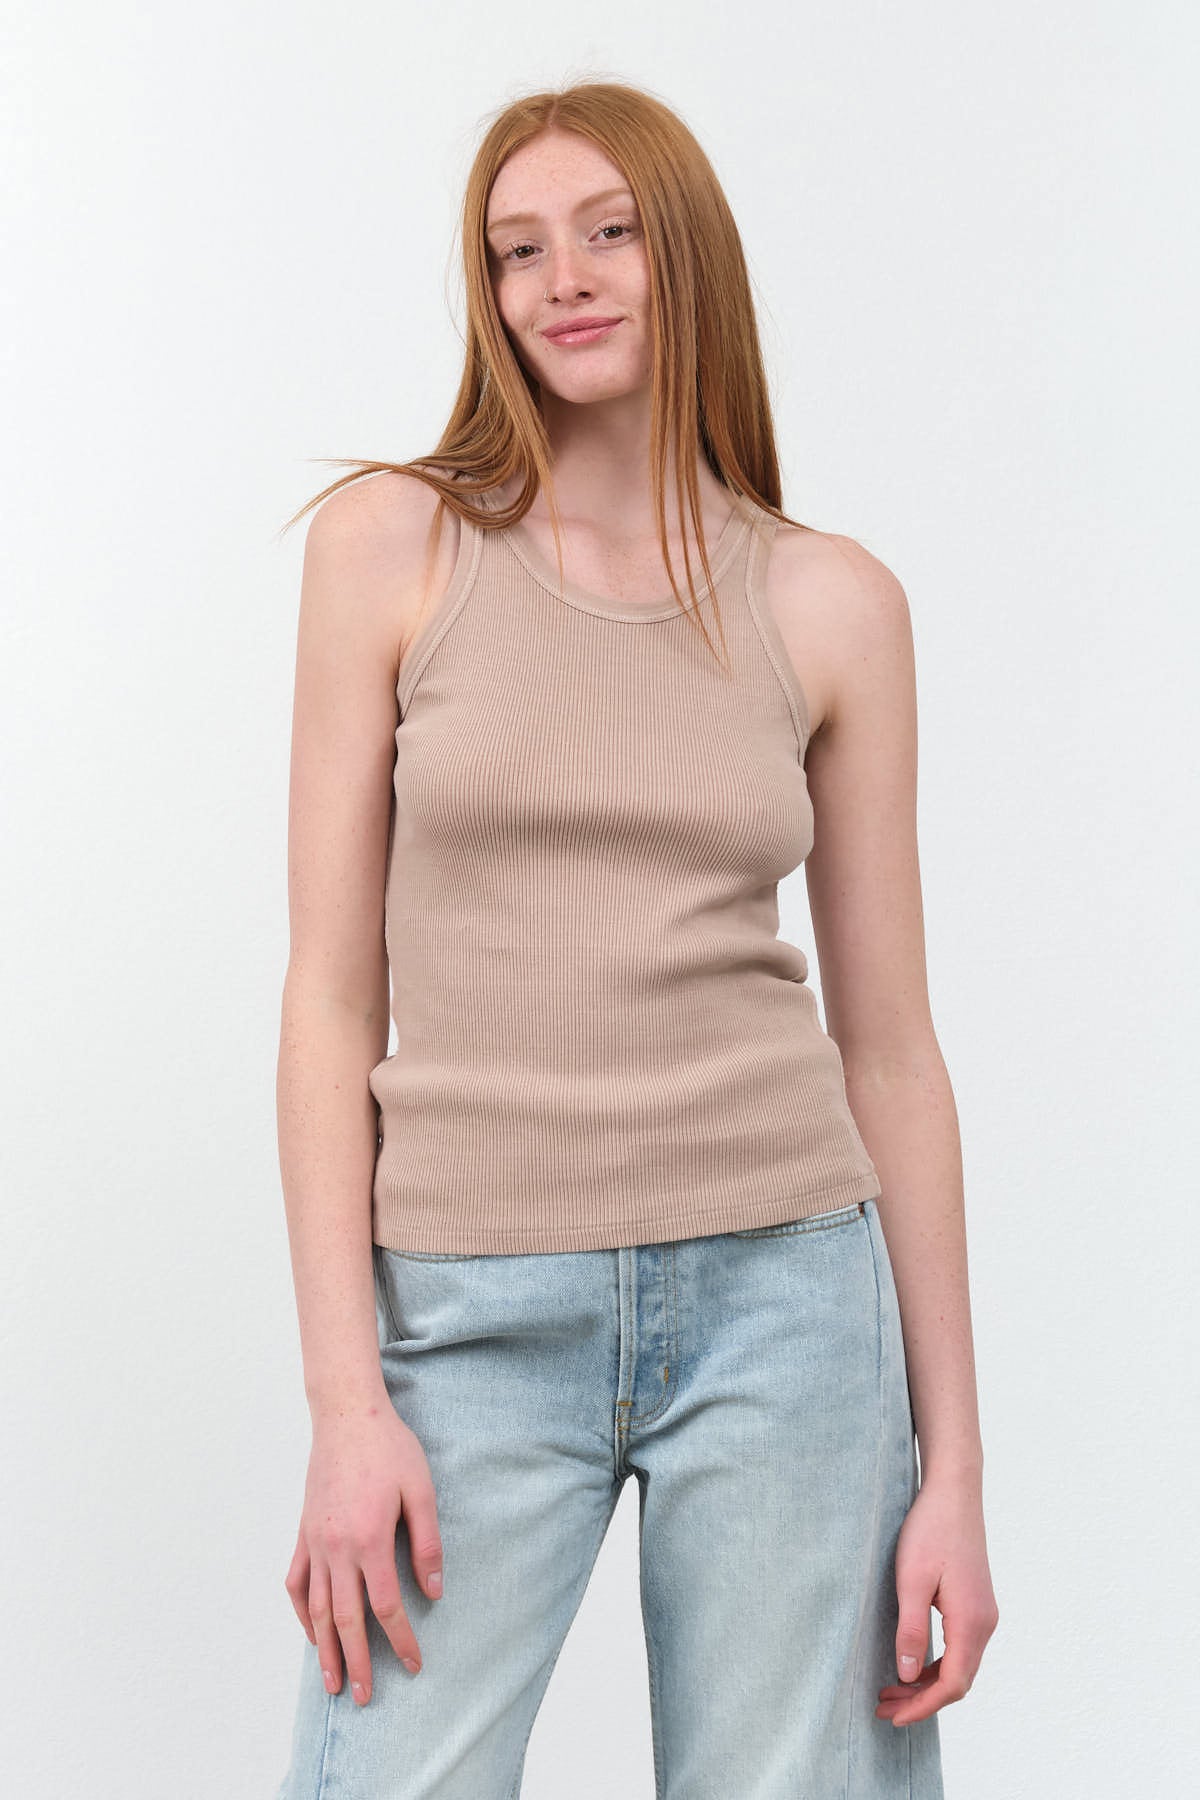 Styled Long Rib Tank in Taupe